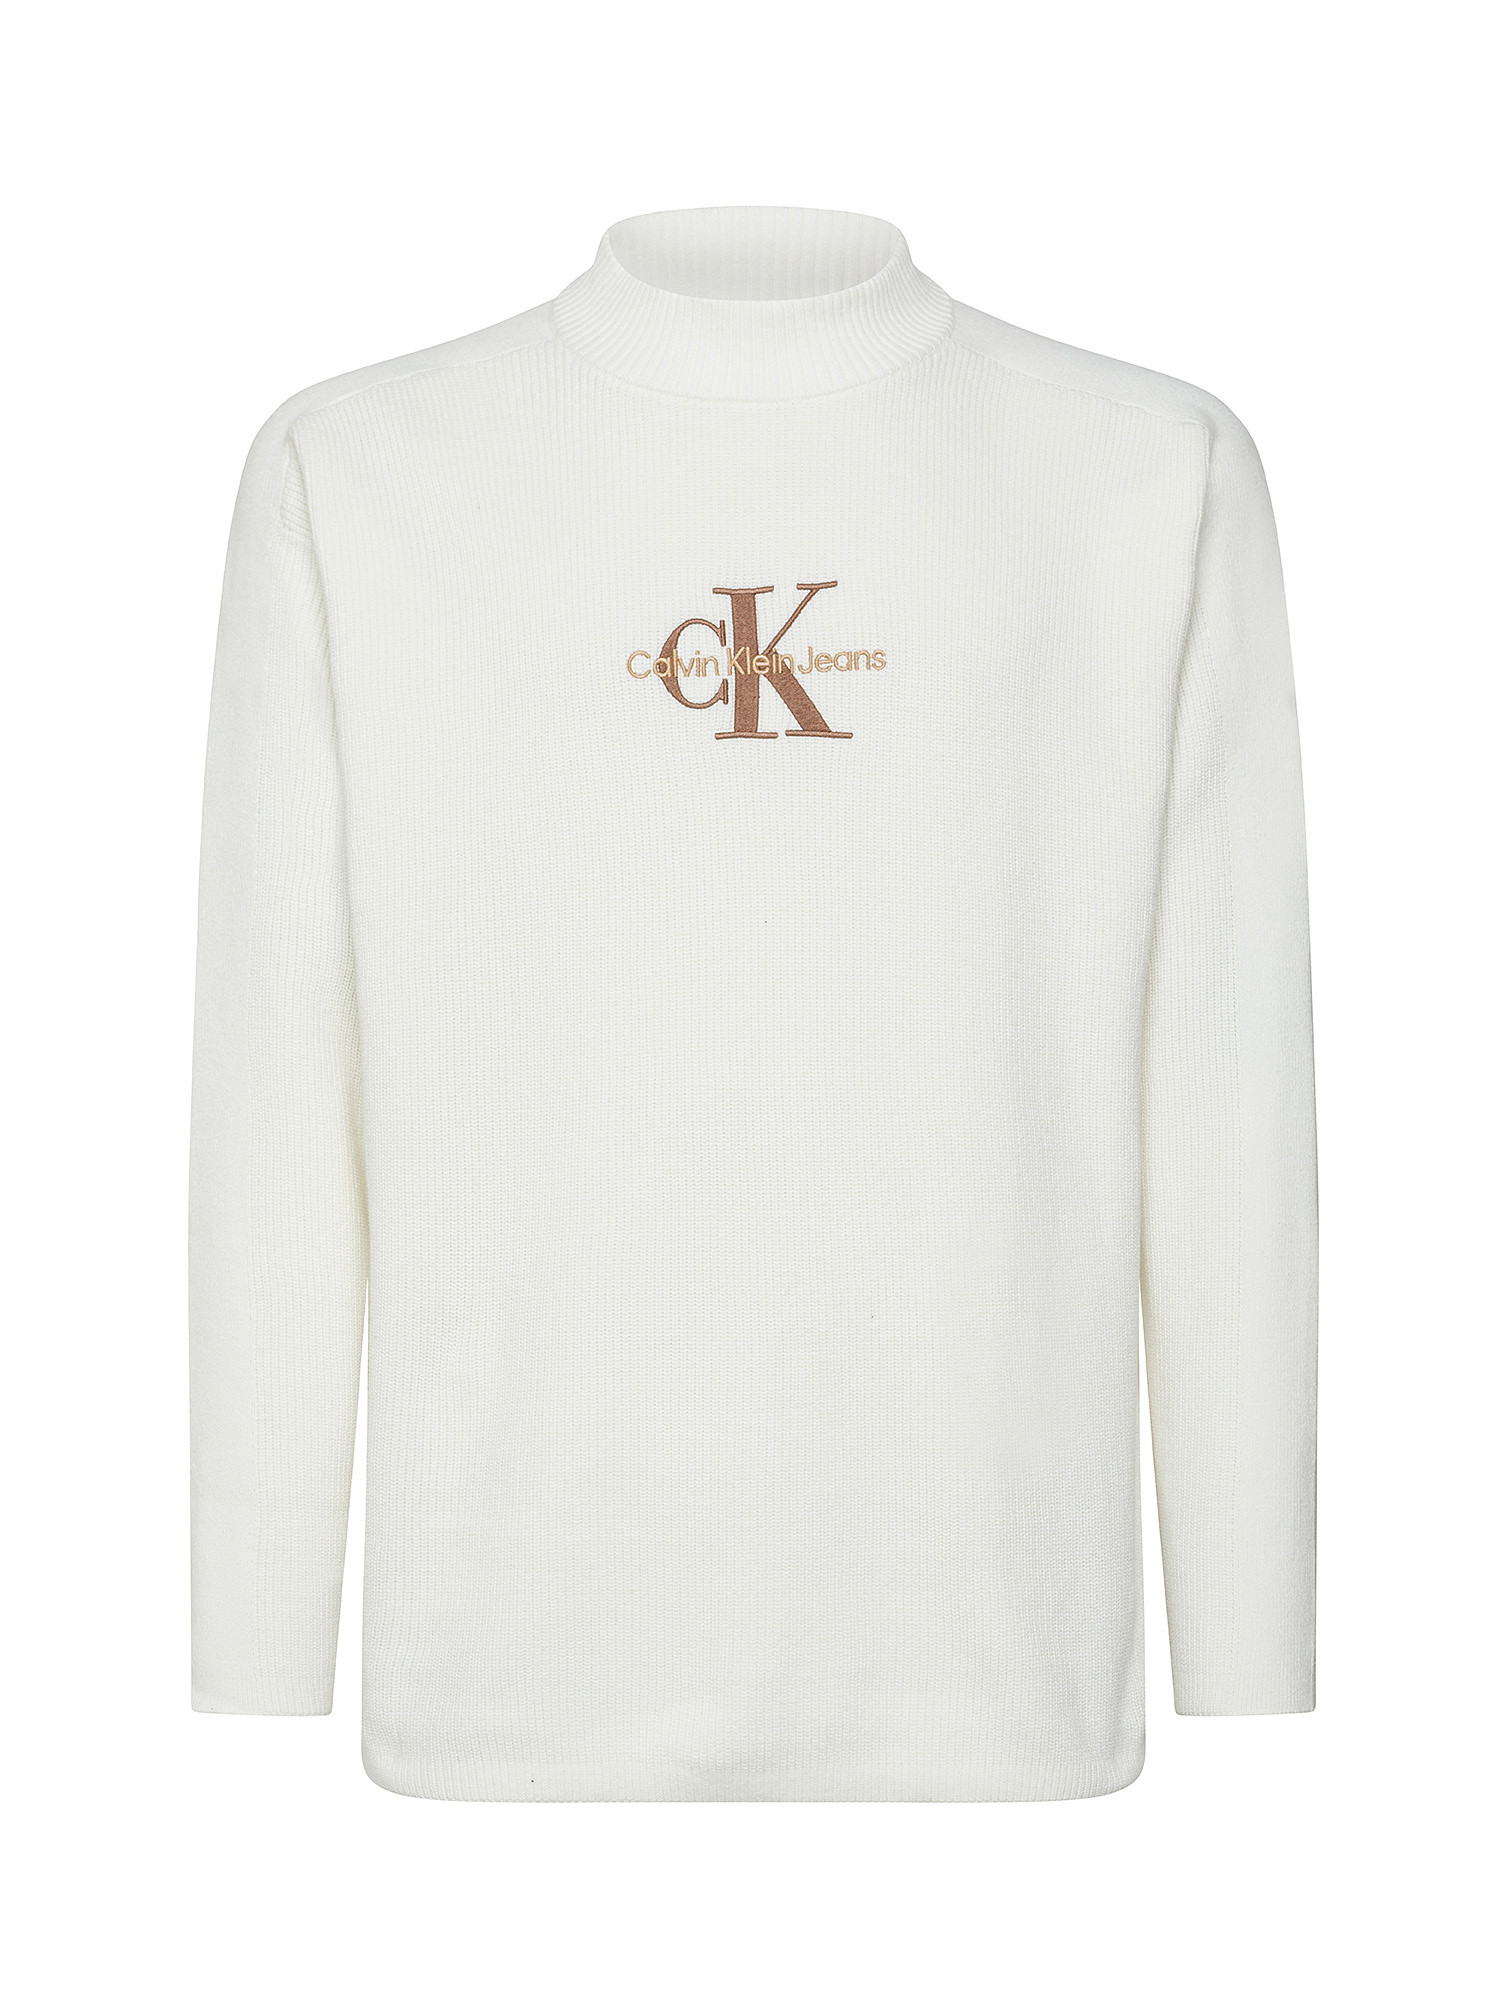 Calvin Klein Jeans -  Pullover a costine in cotone con logo, Bianco, large image number 0